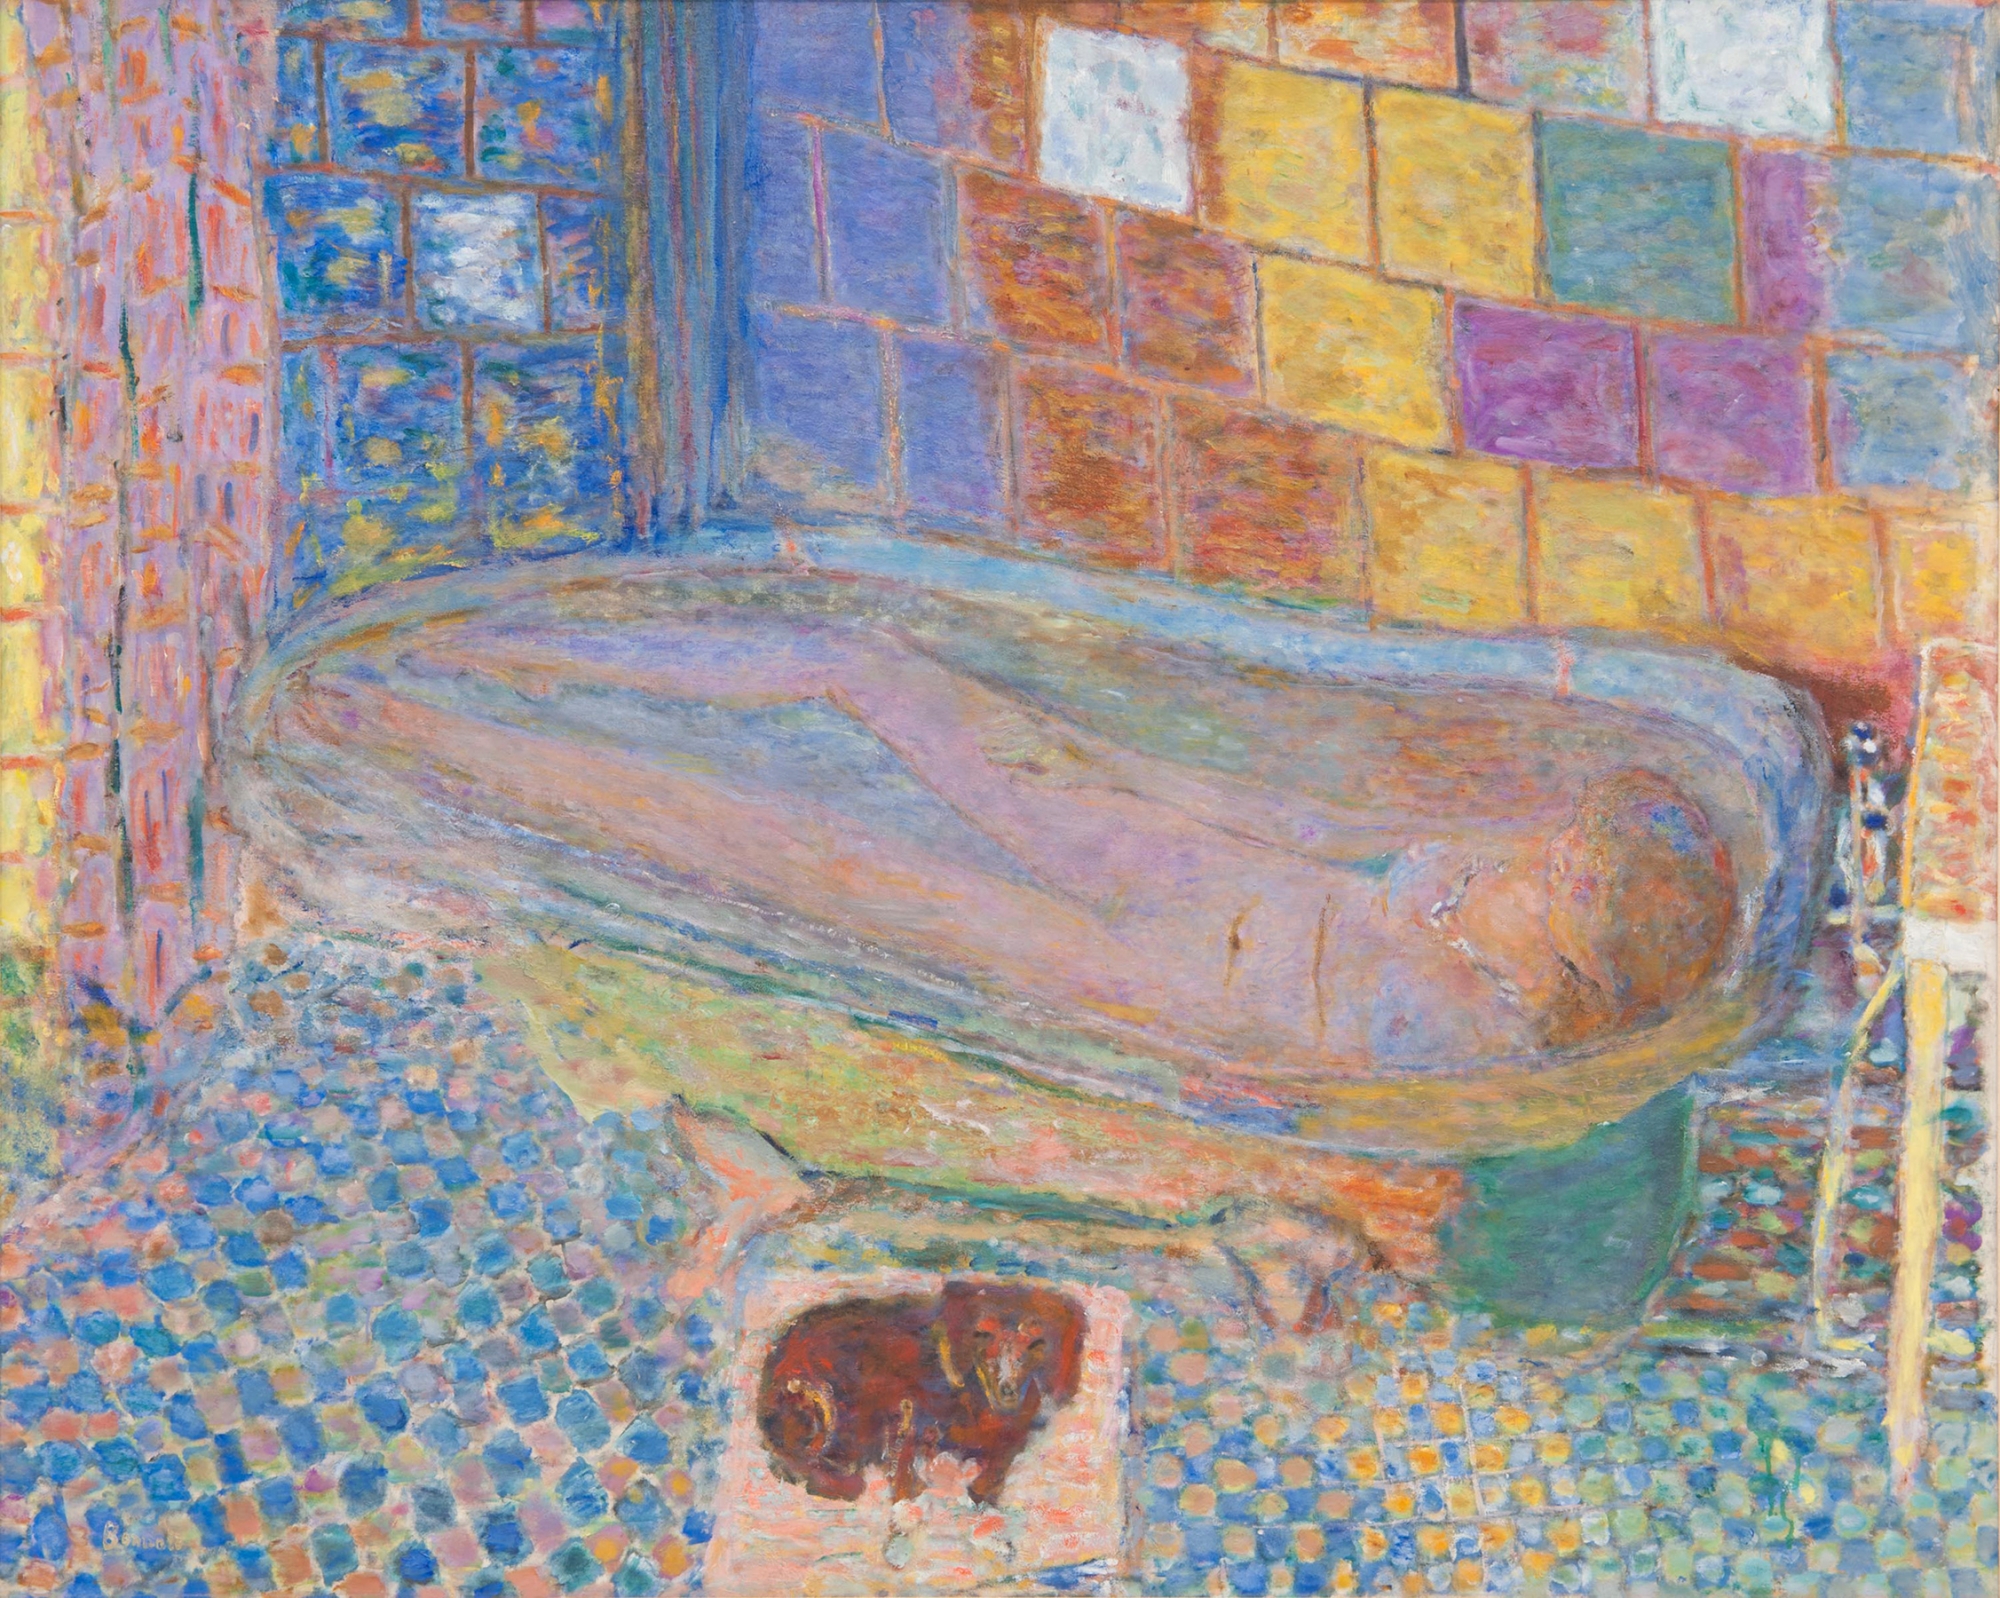 Reference Material: Nude in Bathtub